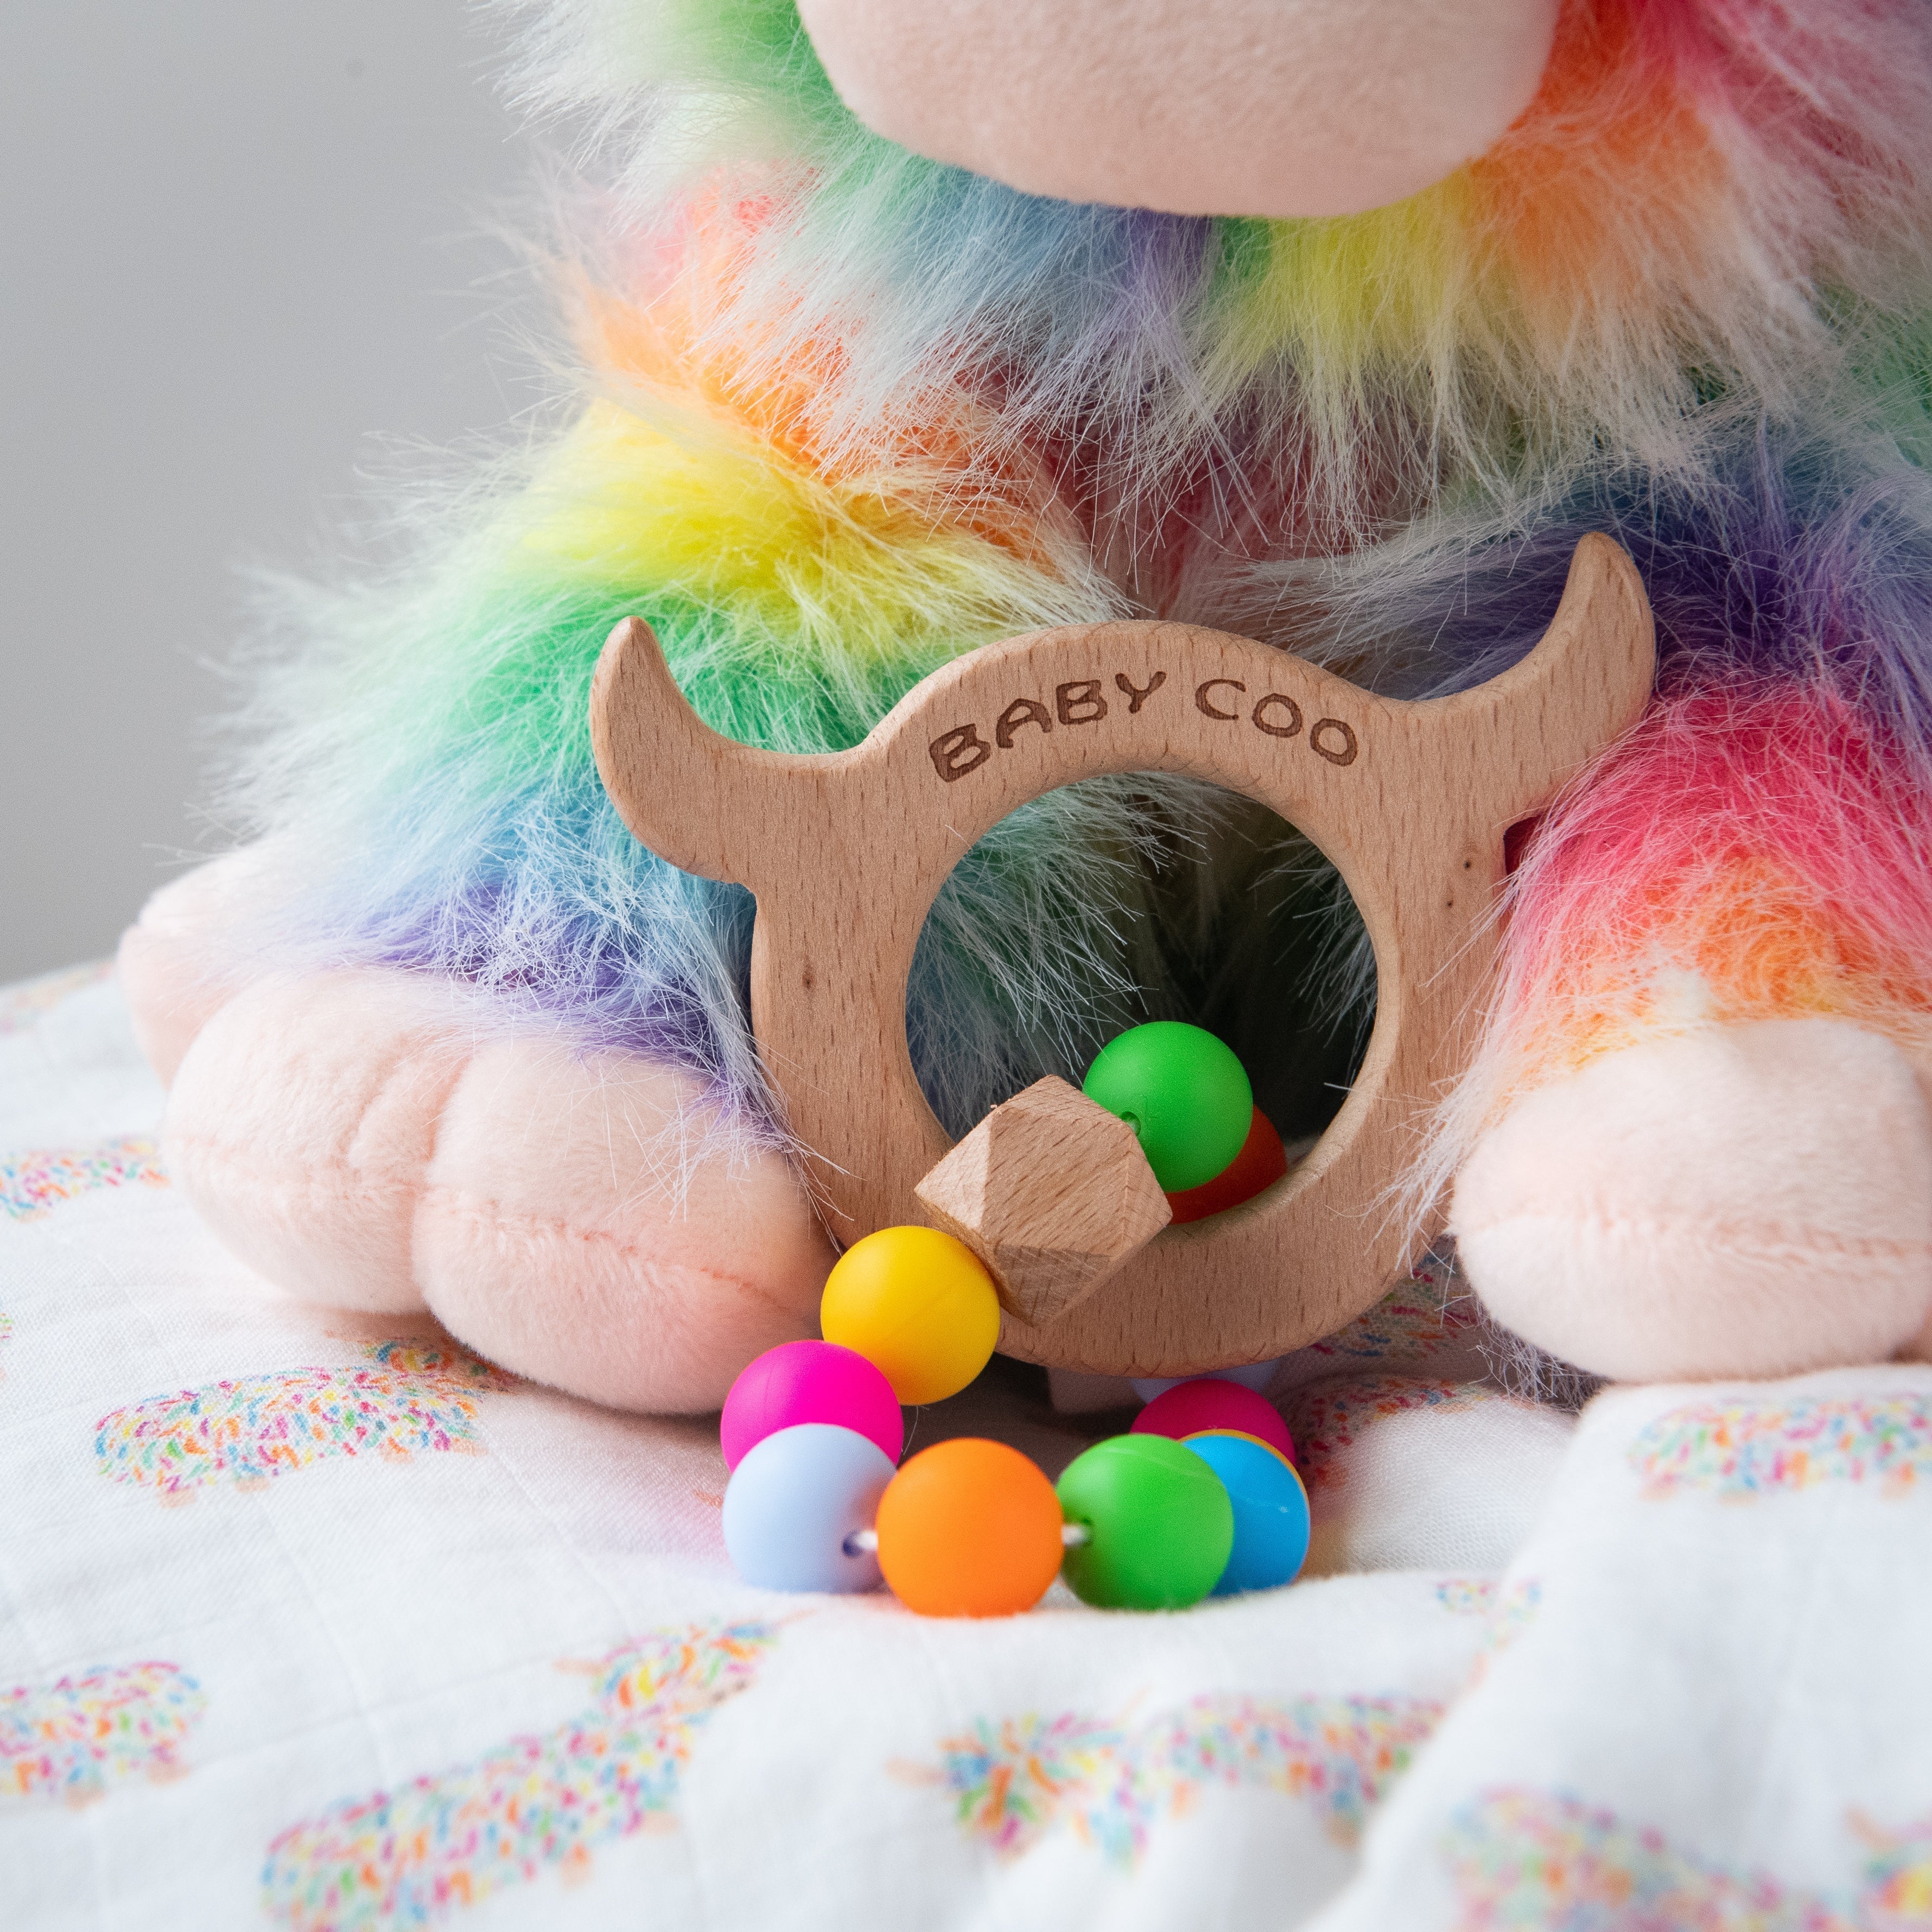 Baby Coo Teething Set | Hairy Coo | Scottish Creations